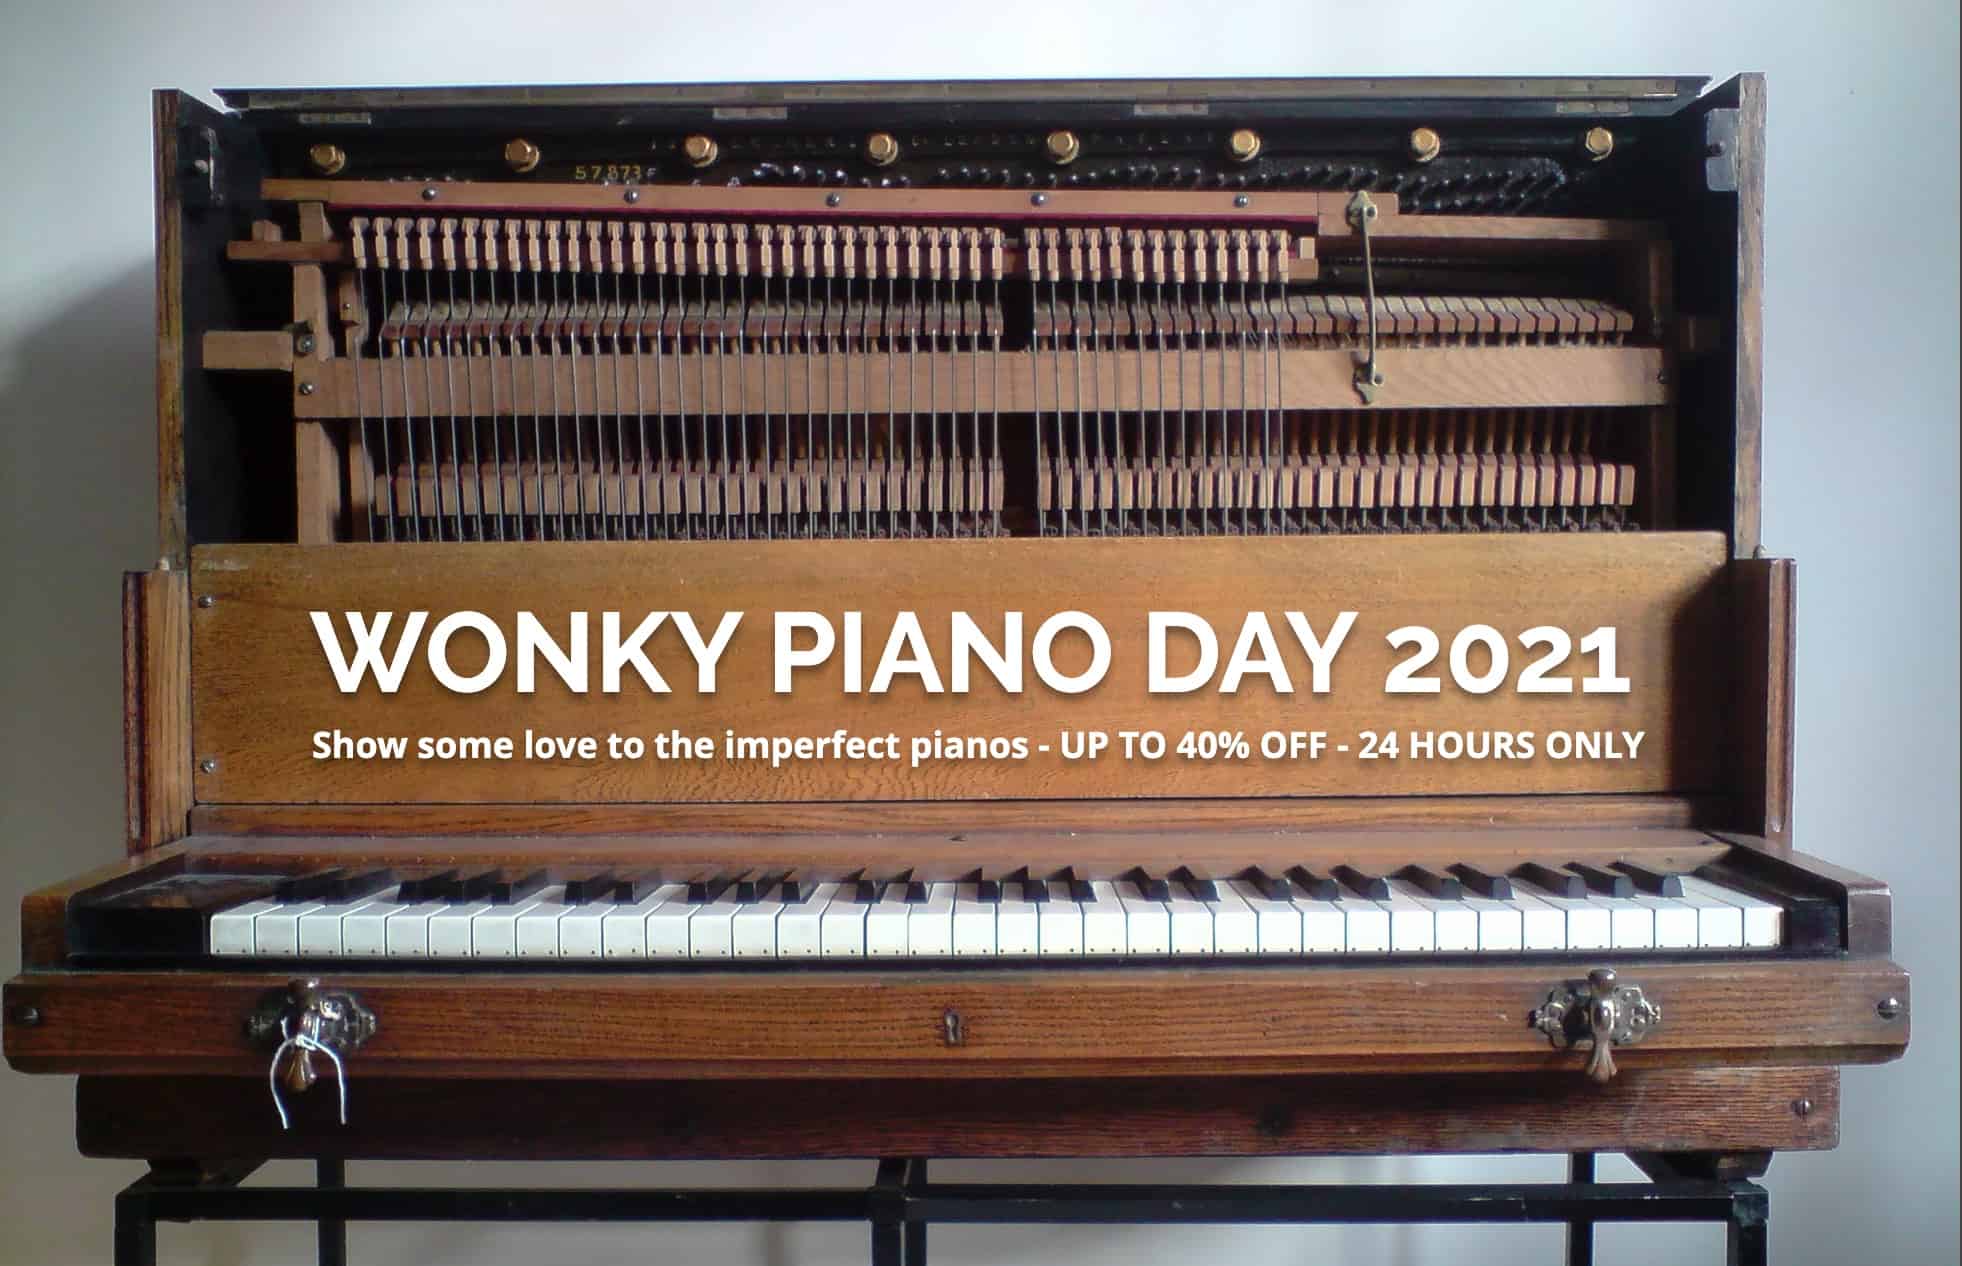 Sound Dust’s WONKY PIANO DAY 2021